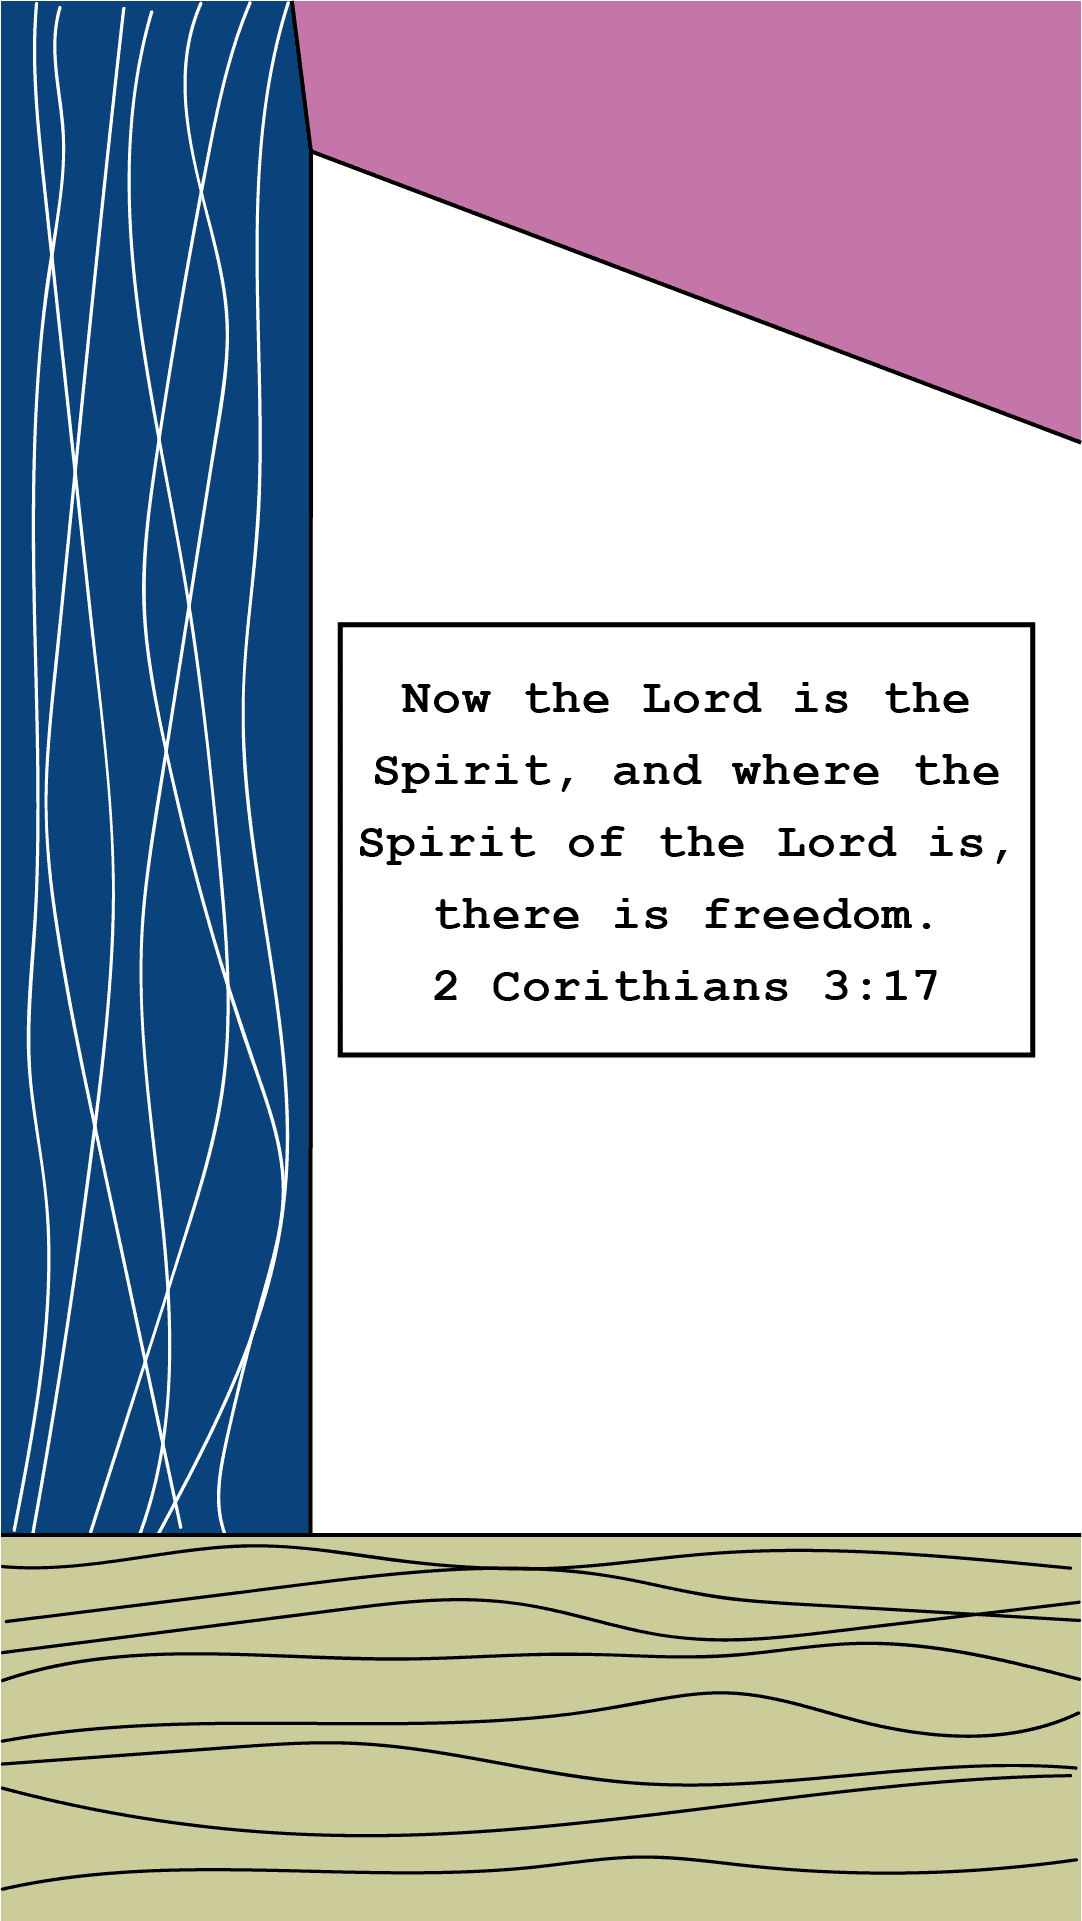 Now the Lord is the Spirit, and where the Spirit of the Lord is, there is freedom 2 Corinthians 3:17 (ESV)